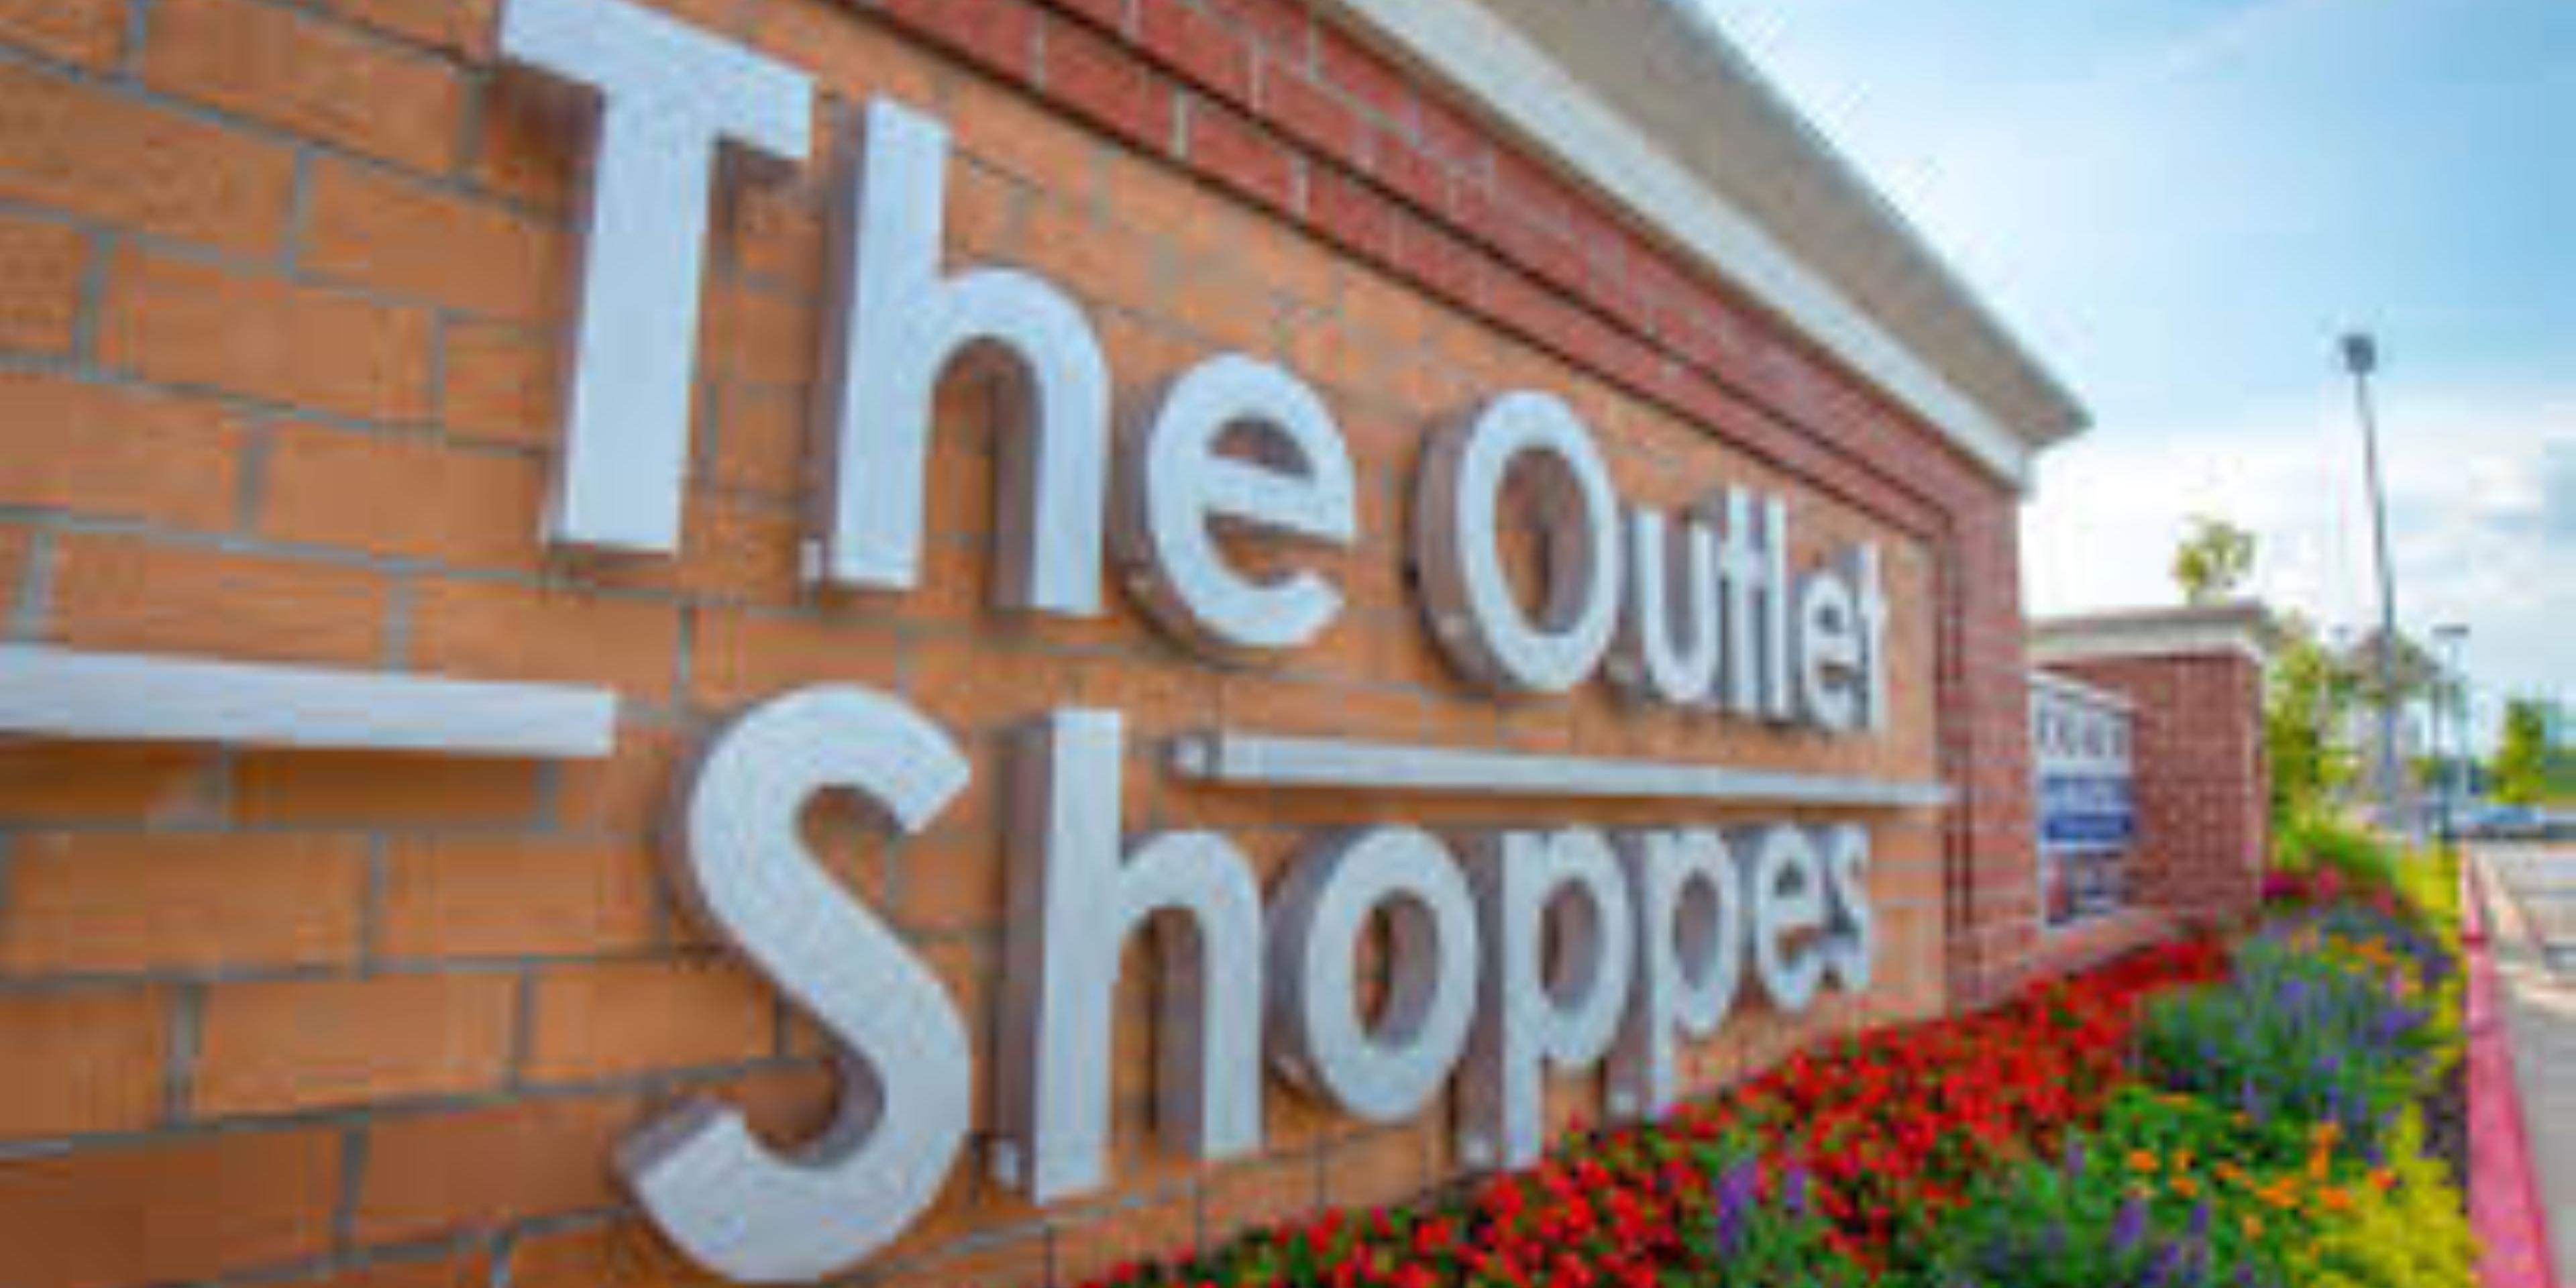 Take advantage of our location minutes away from the Outlet Shoppes at Atlanta. It is North Atlanta’s premier shopping destination. Save 20-70% every single day on nearly 100 name brand stores, including Saks Fifth Avenue OFF 5th, Kate Spade New York, Michael Kors, Coach, Nike, Cole Haan and Tommy Hilfiger.